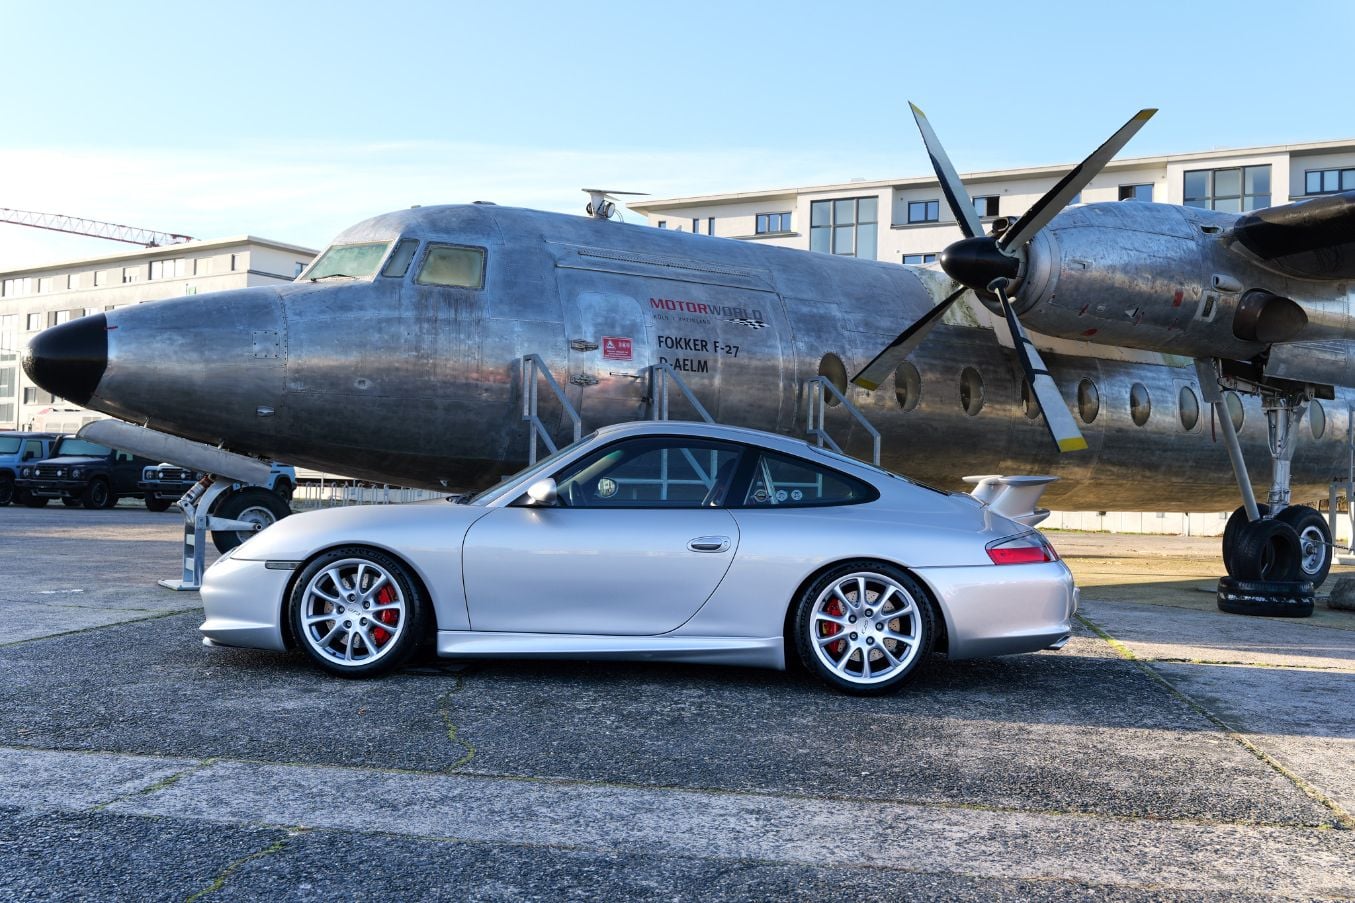 2004 Porsche GT3 - 2004 996 GT3 - Used - VIN WPOAC299X4S692349 - 16,000 Miles - 6 cyl - 2WD - Manual - Coupe - Silver - Pulheim, Germany